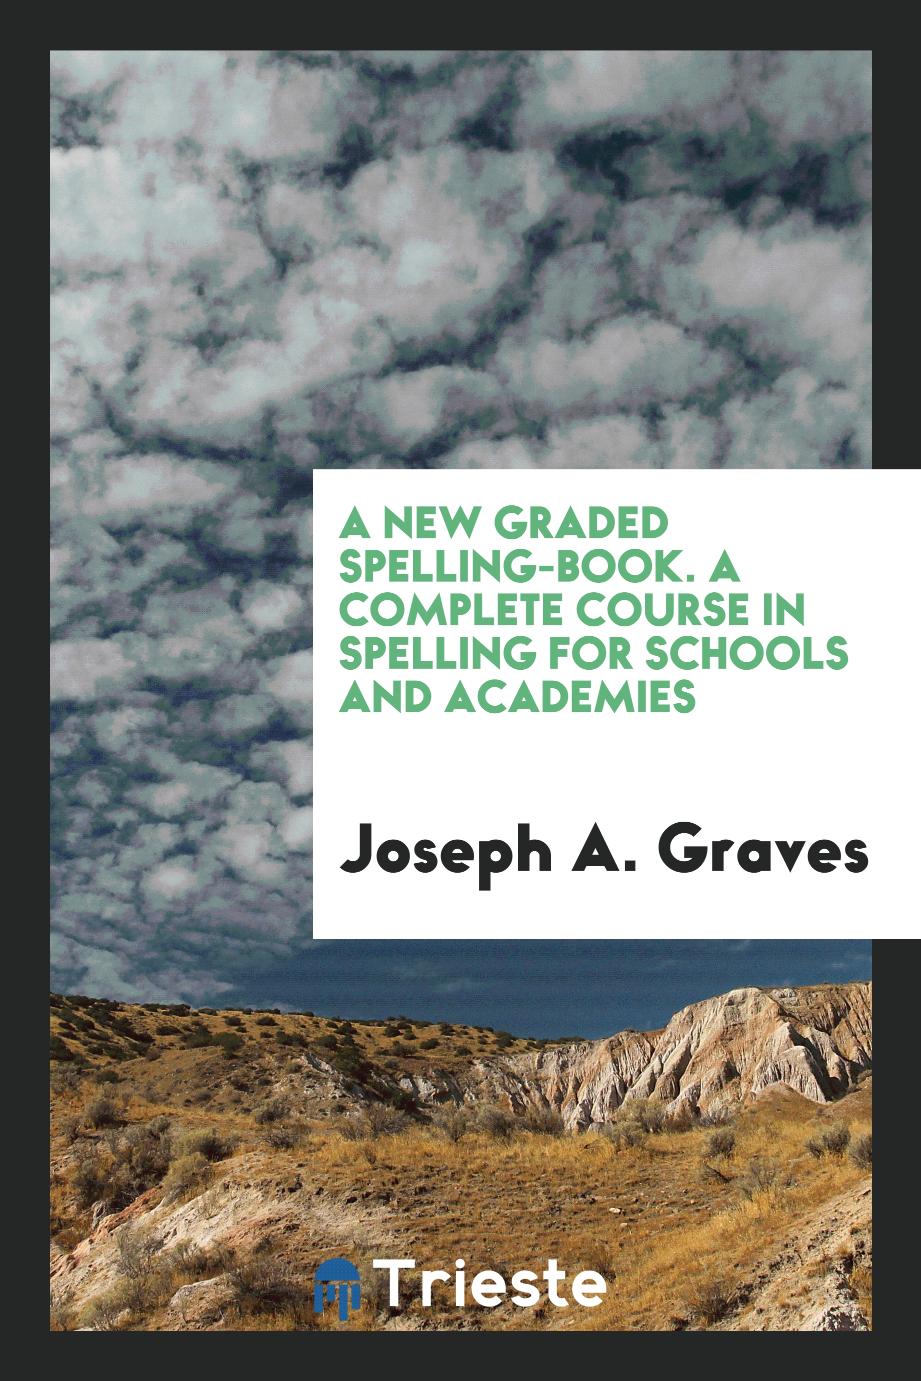 A New Graded Spelling-Book. A Complete Course in Spelling for Schools and Academies